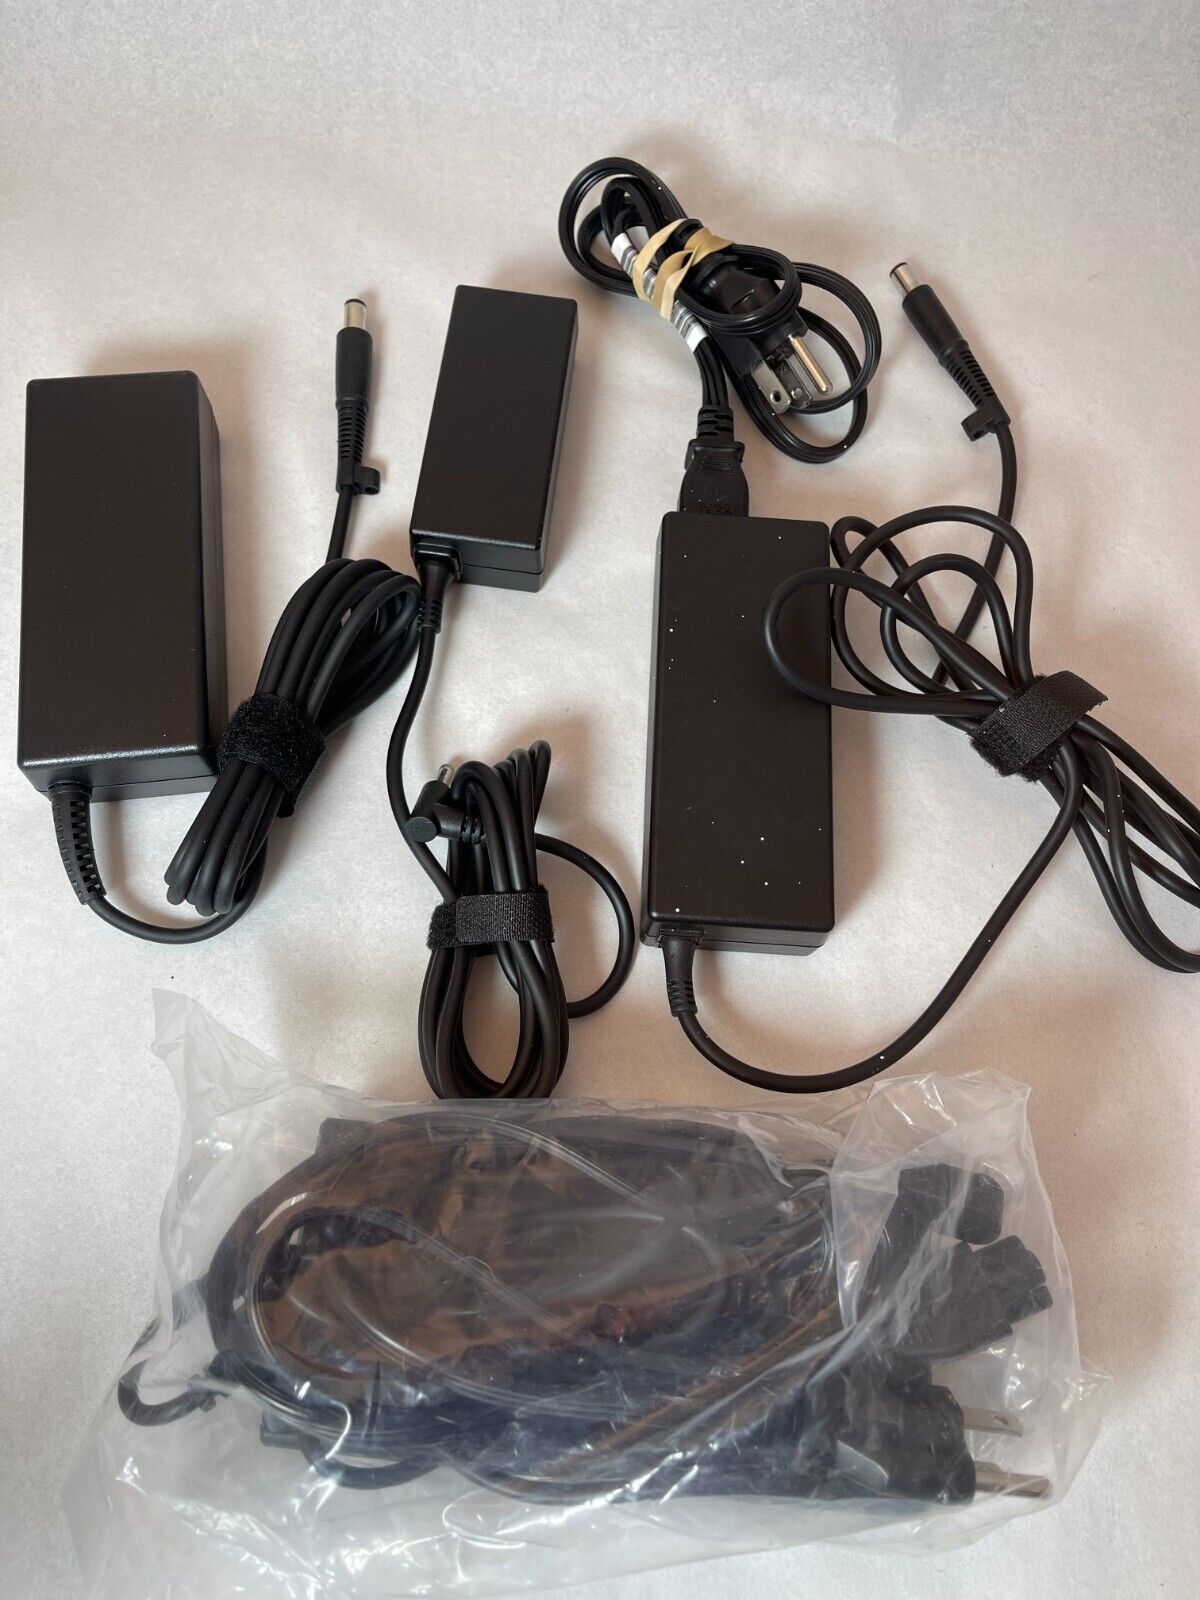 Lot of 7 Dell, HP, Misc laptop power adapters